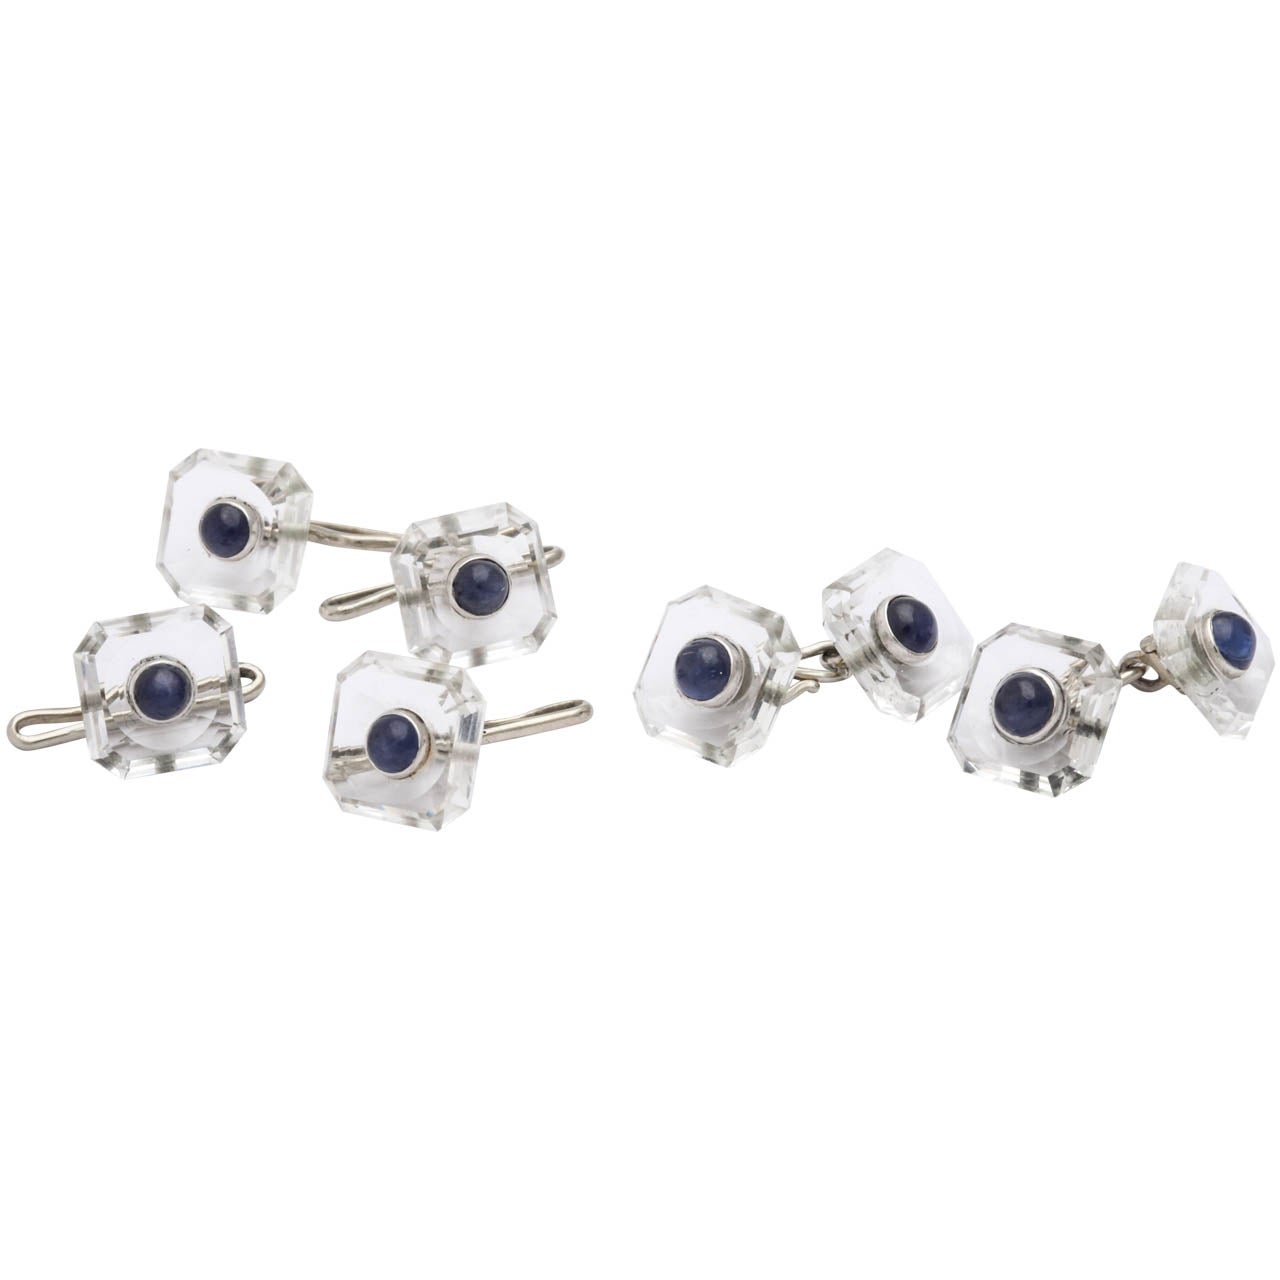 ART DECO Rock Crystal And Sapphire Stud Set With Cufflinks